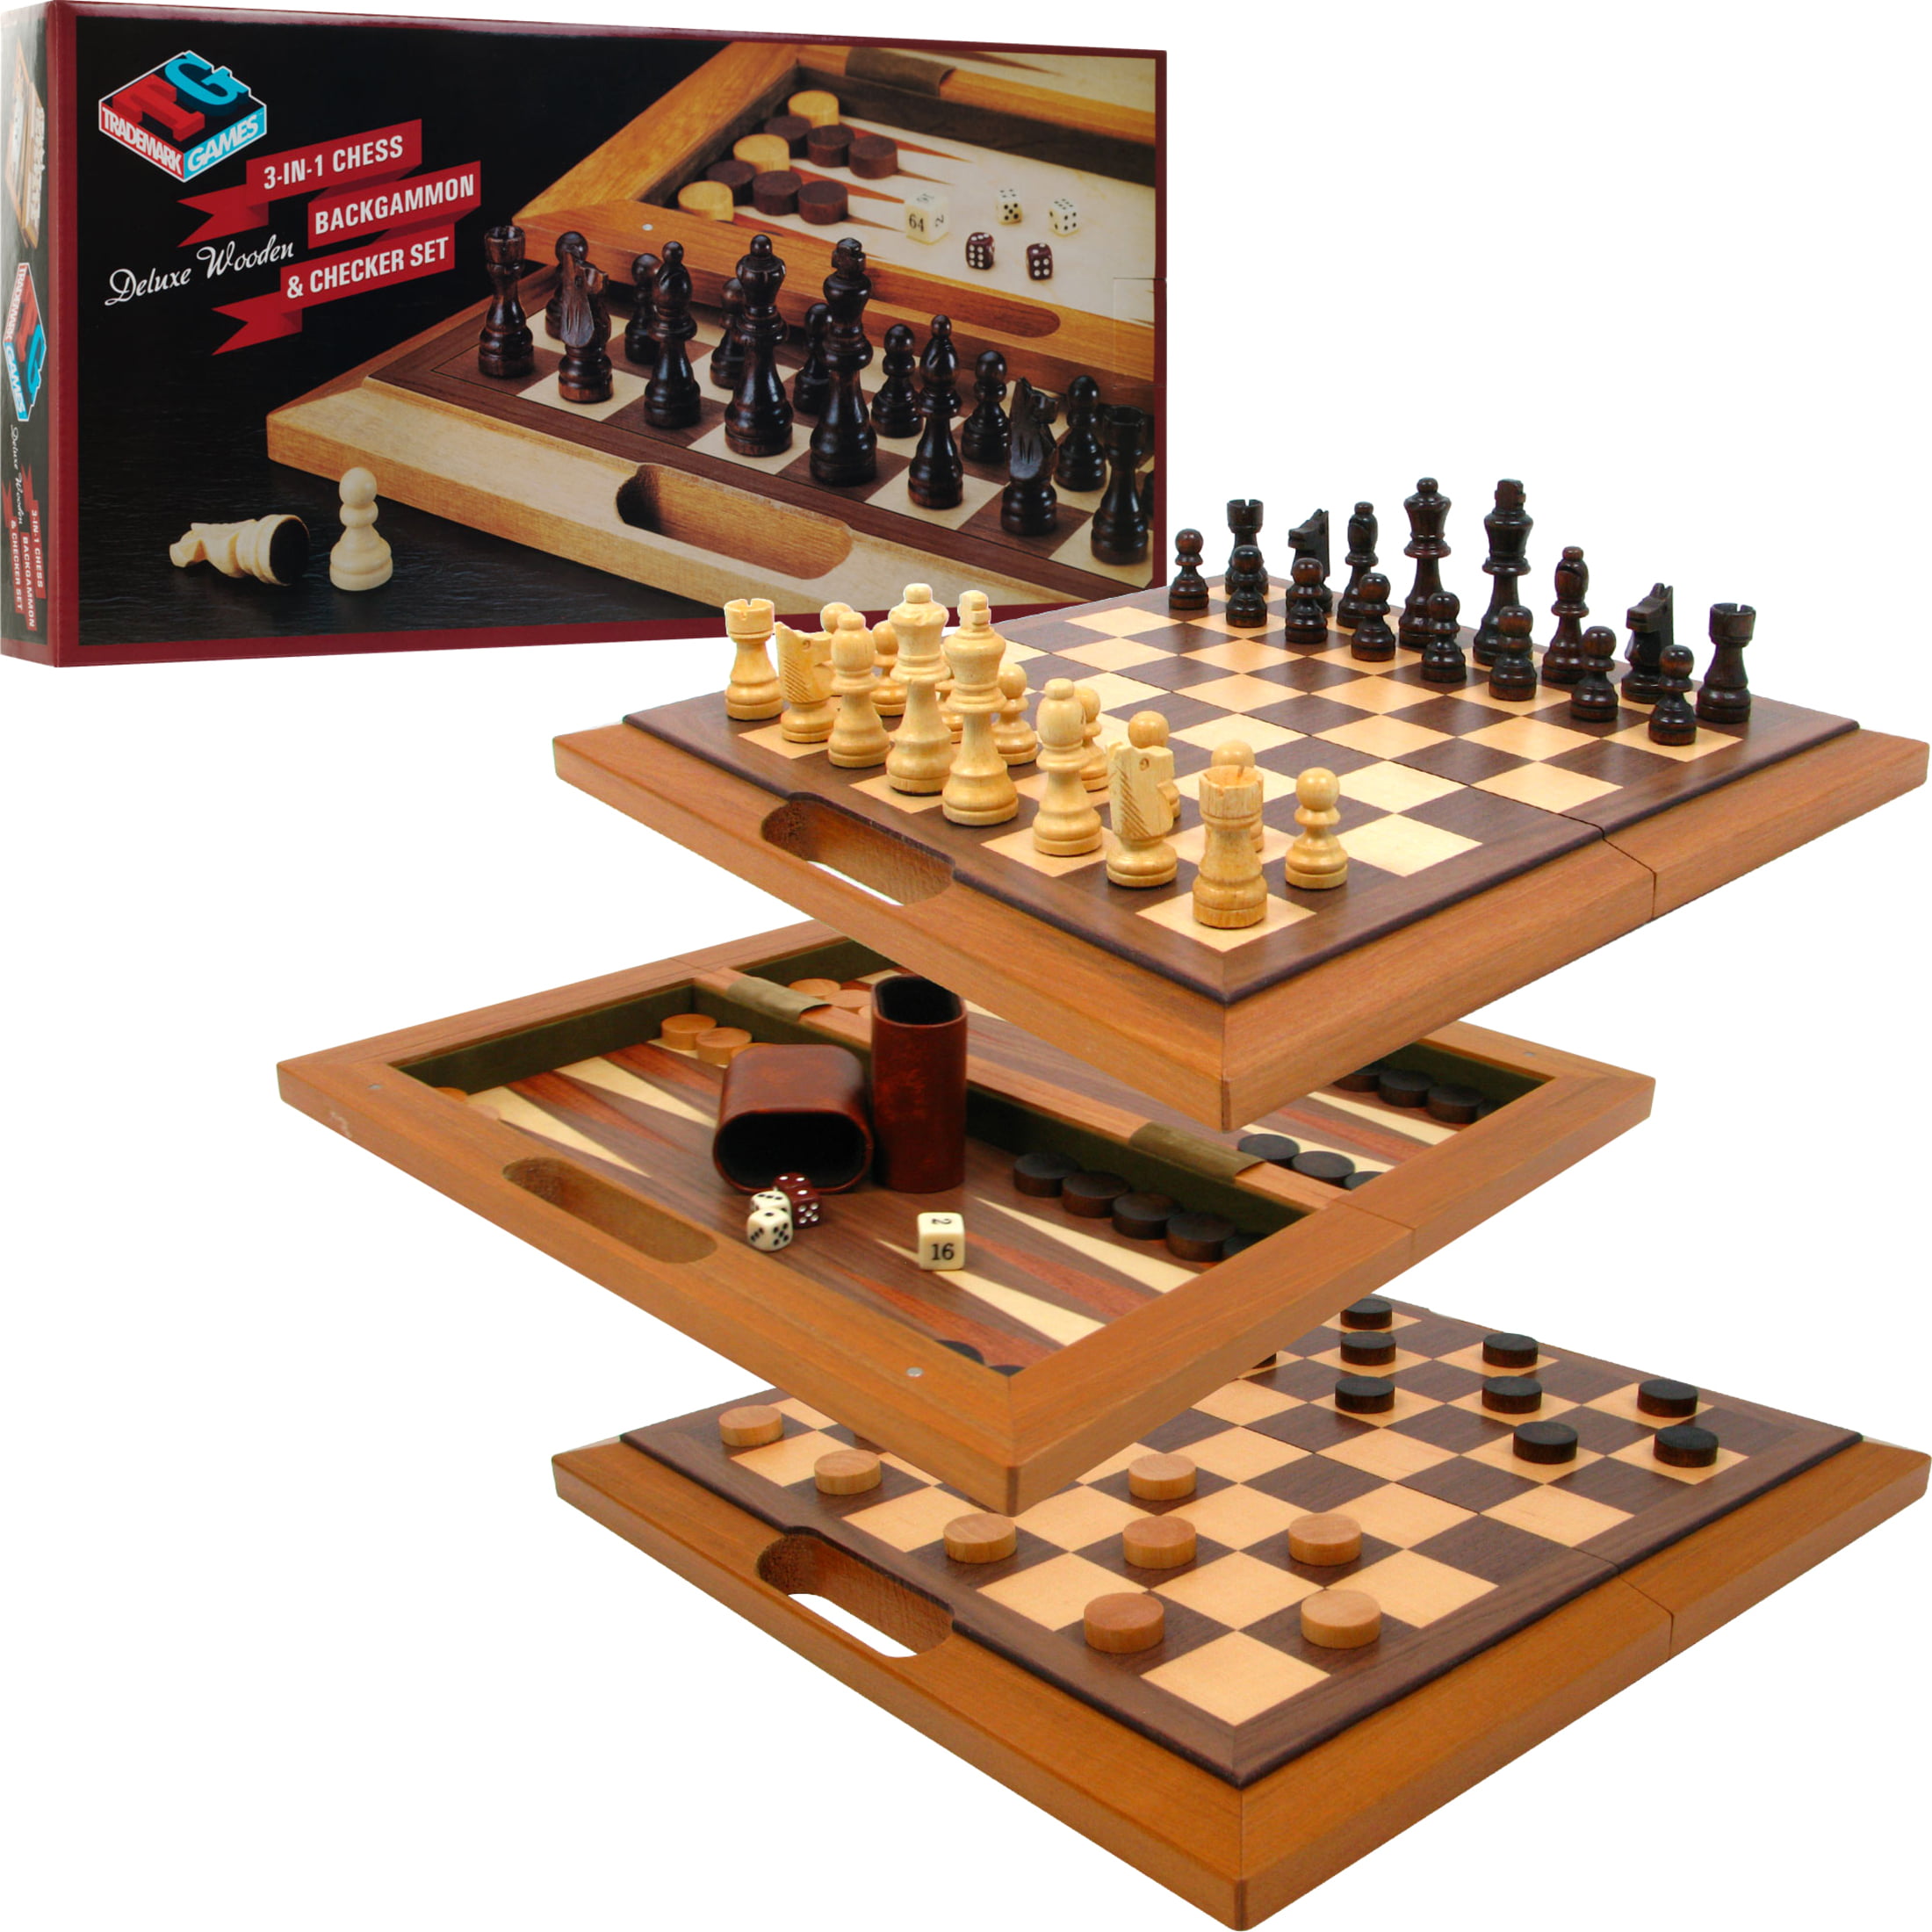 Checkers And Backgammon Details about  / 3-in-1 Chess